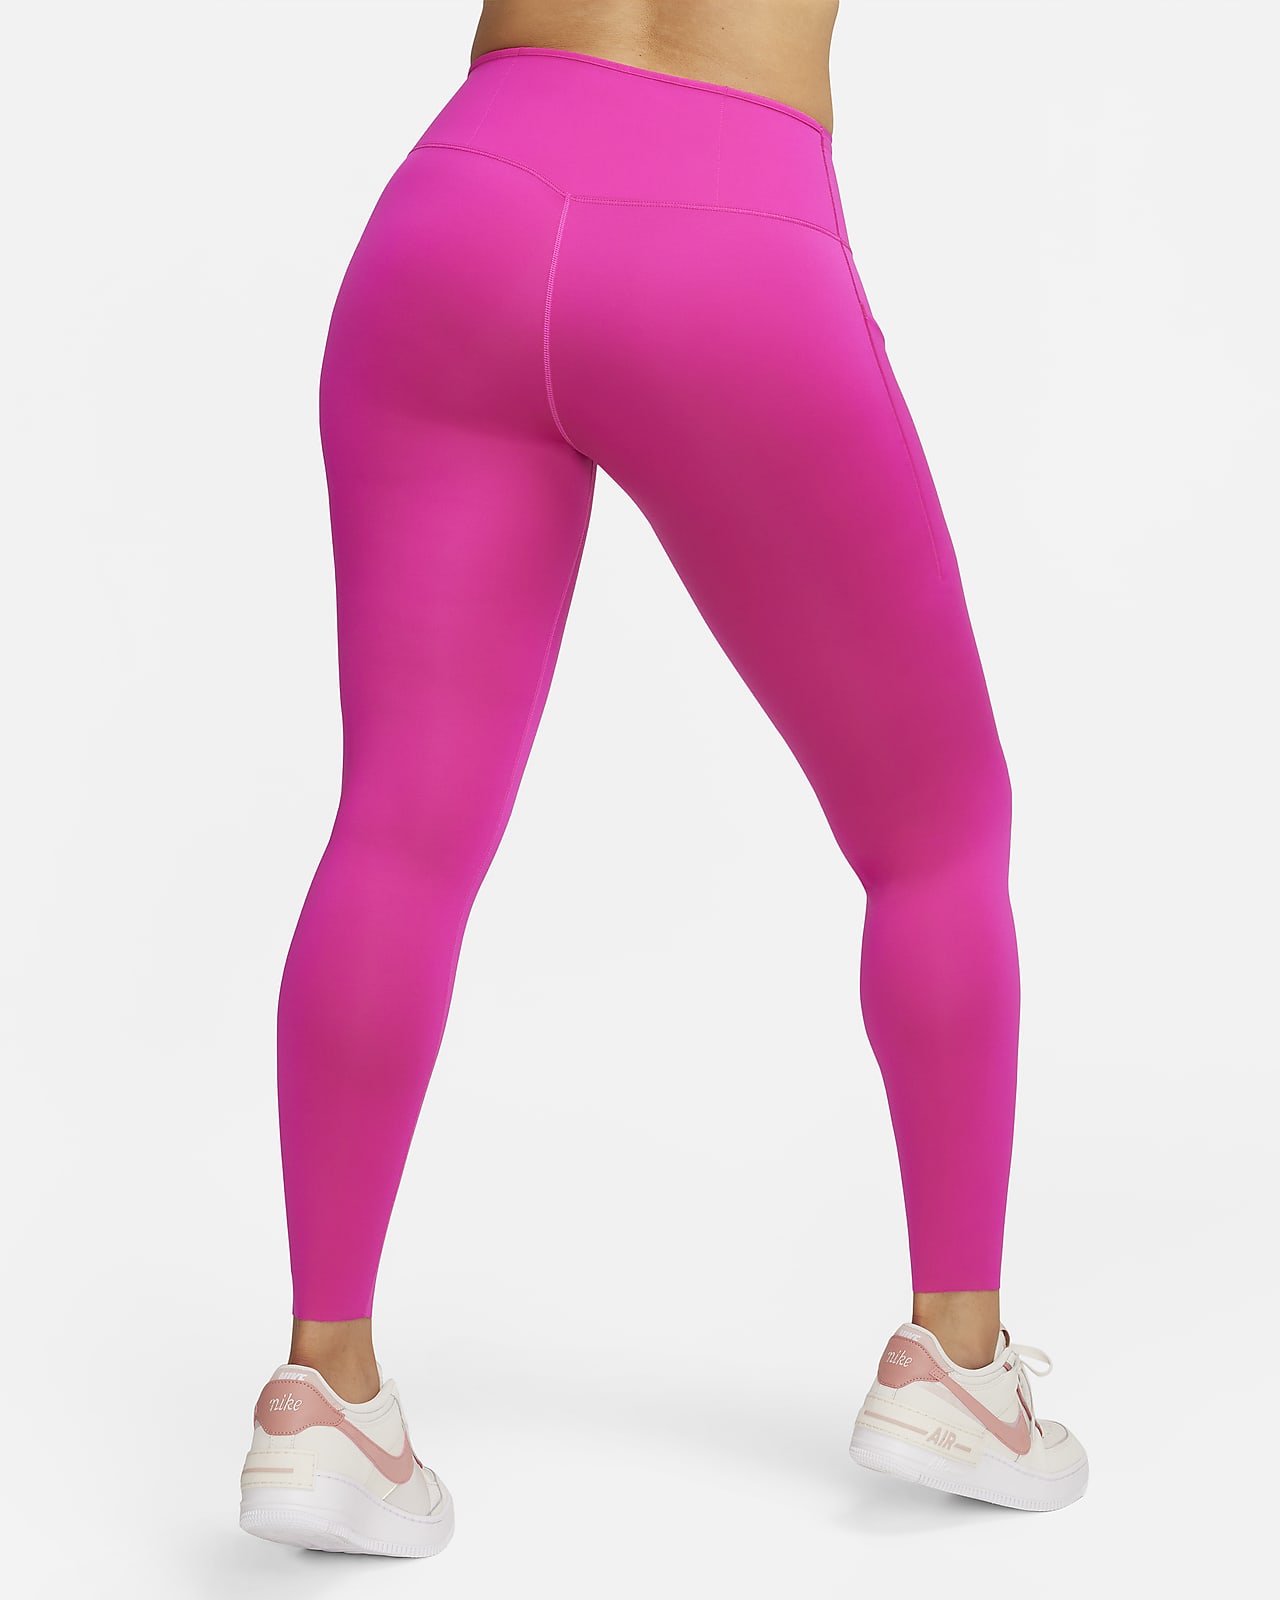 Fabletics Red Tracksuits for Women